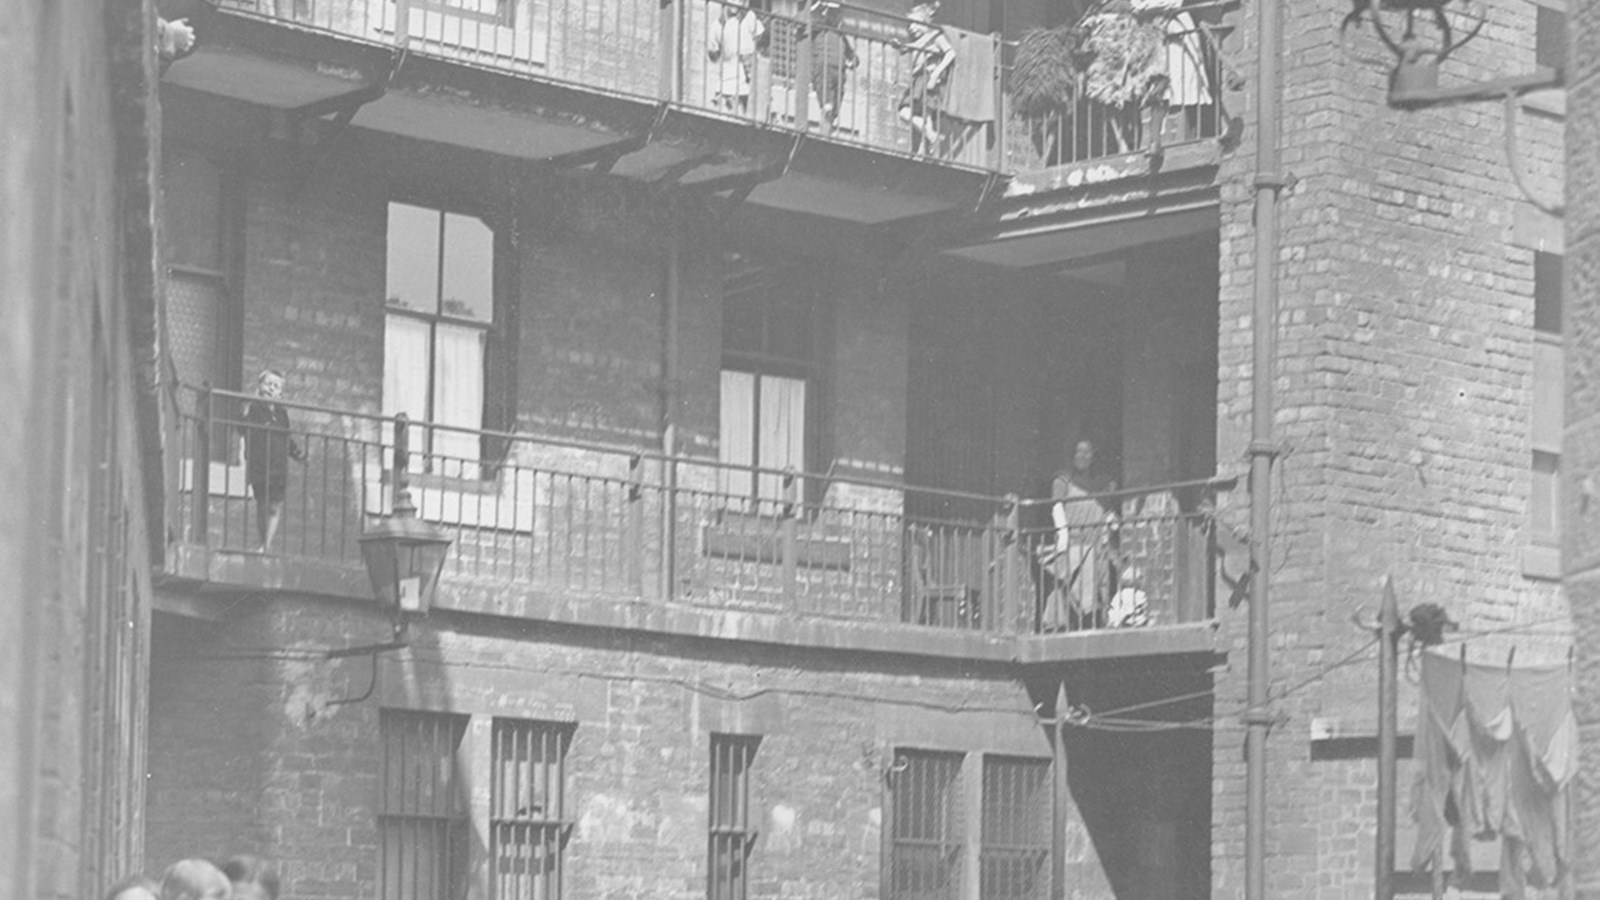 A black and white photograph of a model dwelling house in King Street, Glasgow, with children playing in the courtyard and adults watching overhead from the verandas.